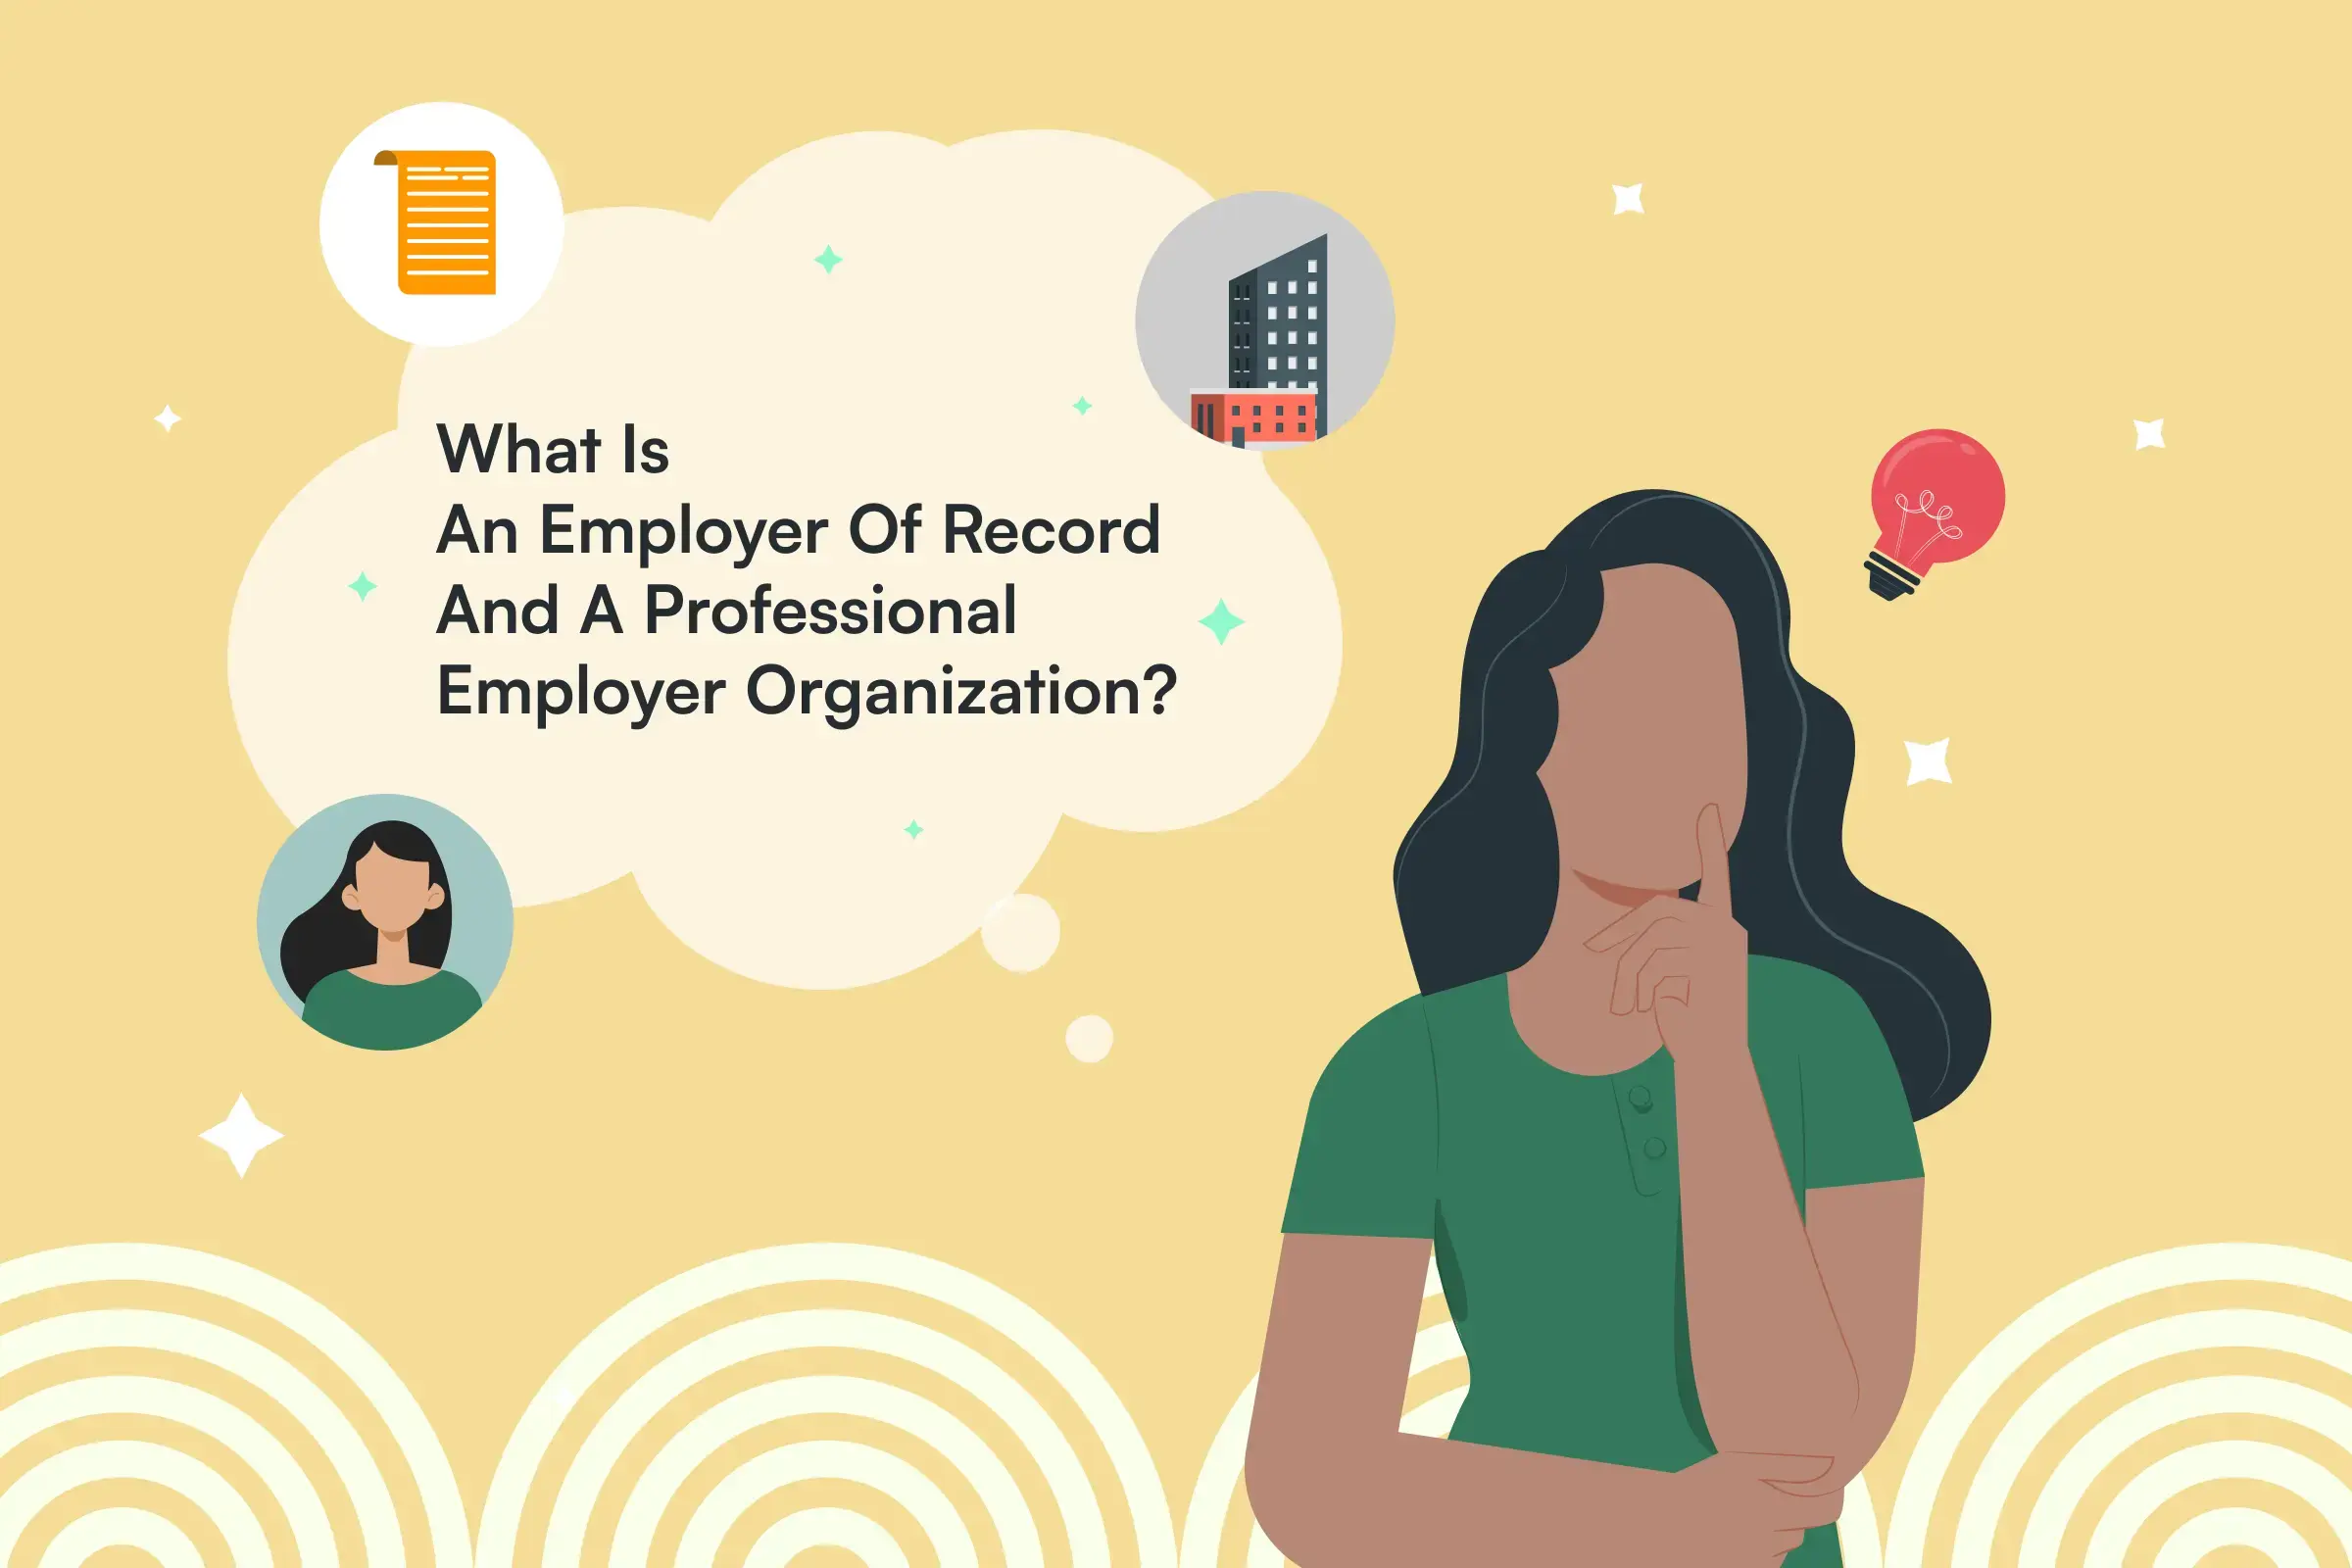 What is an employer of record and a professional employer organization?